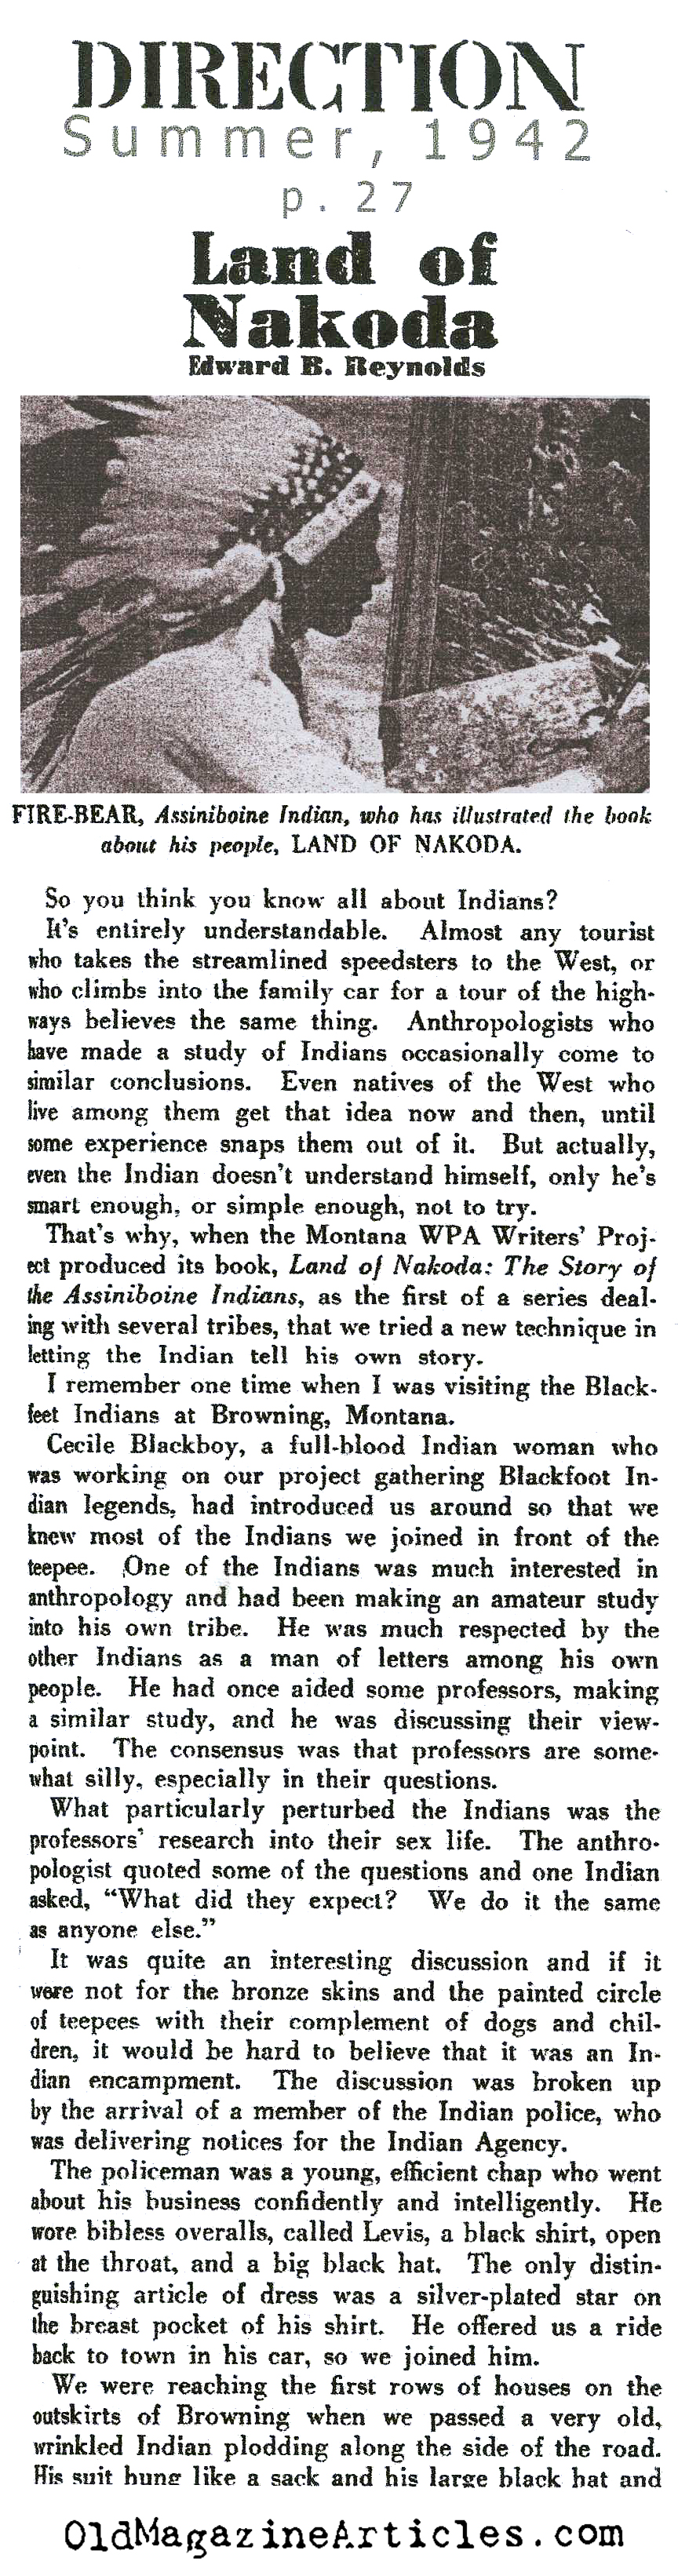 Tales of the Assinibone Tribe (Direction Magazine, 1942)